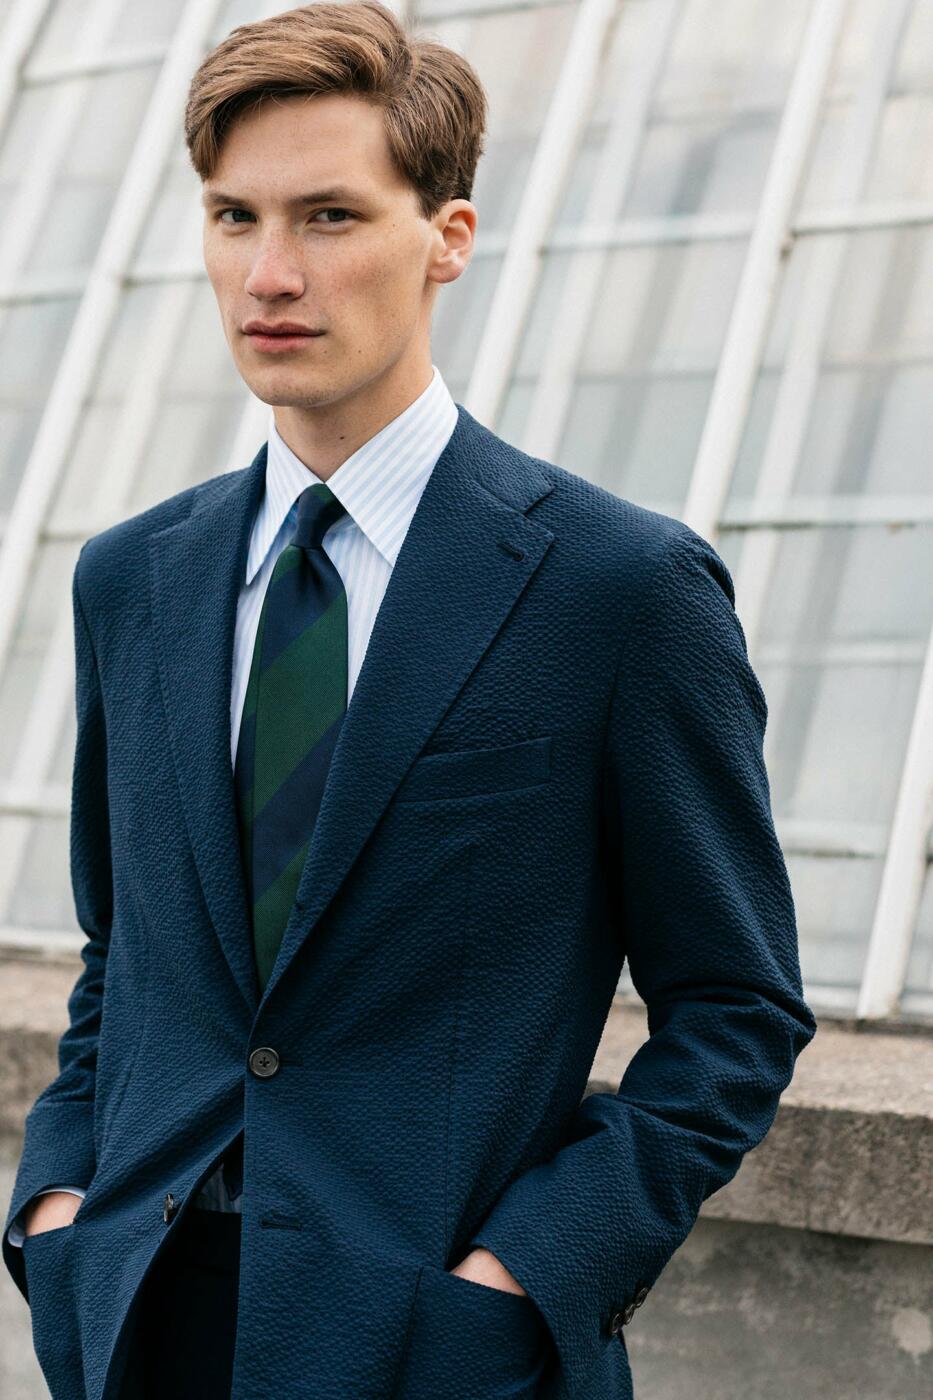 Five good ready-made suits under £1000 – Permanent Style